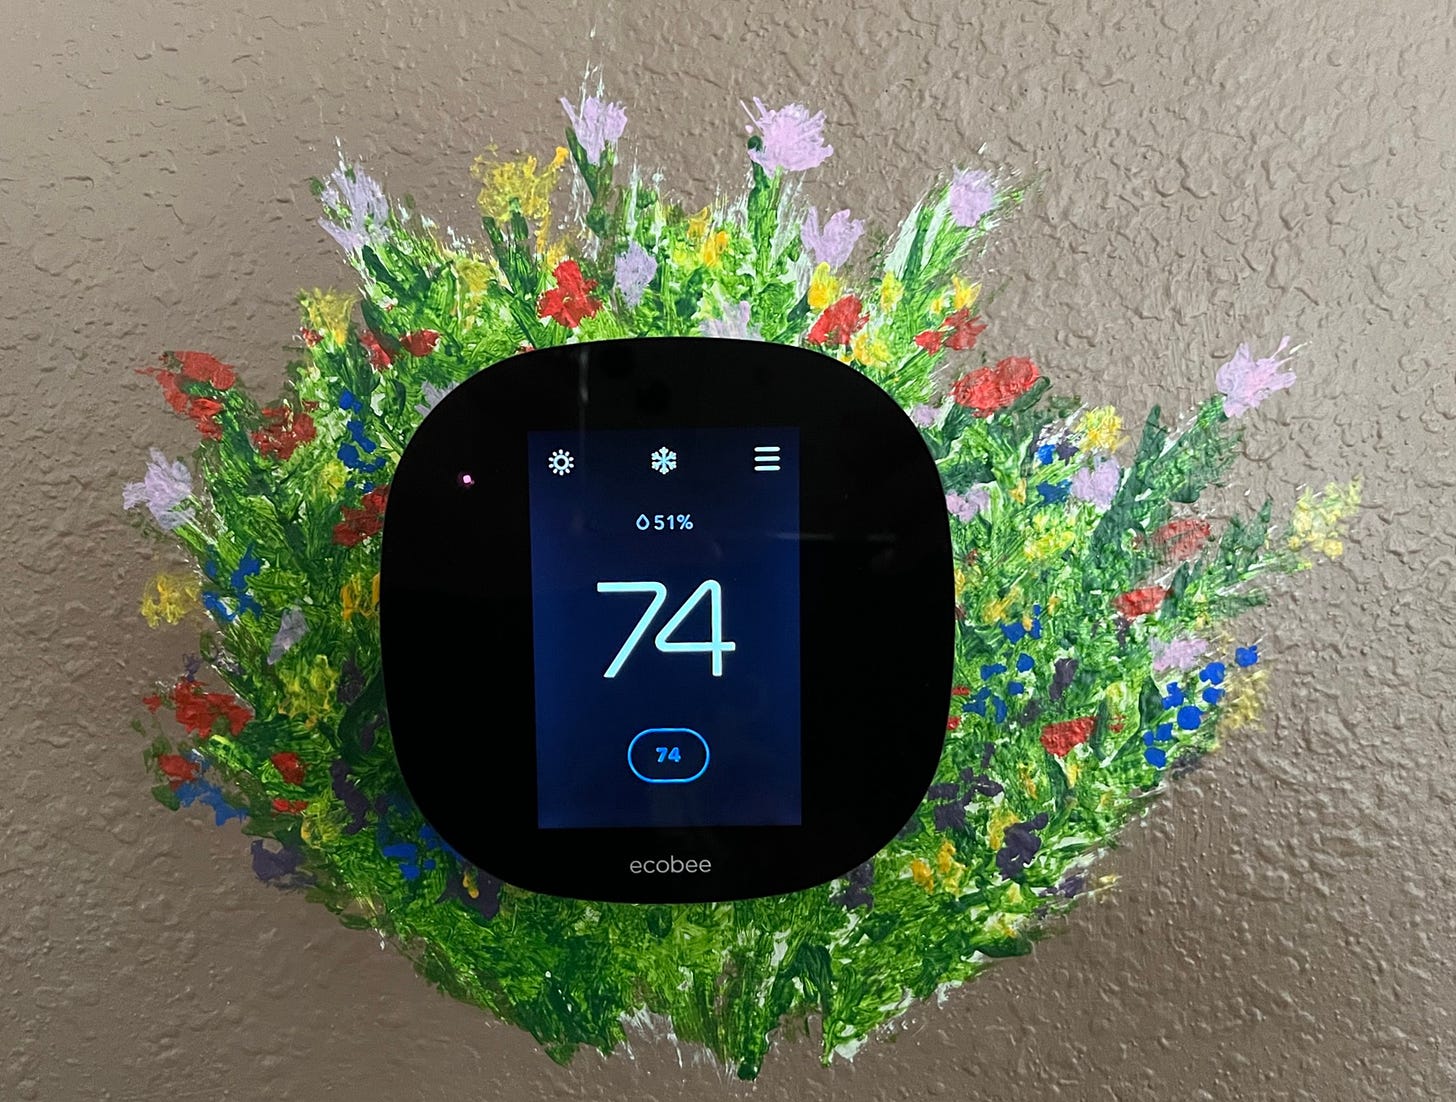 Photo of Ecobee thermostat mounted to wall with colorful, impressionistic flowers painted around the Ecobee device